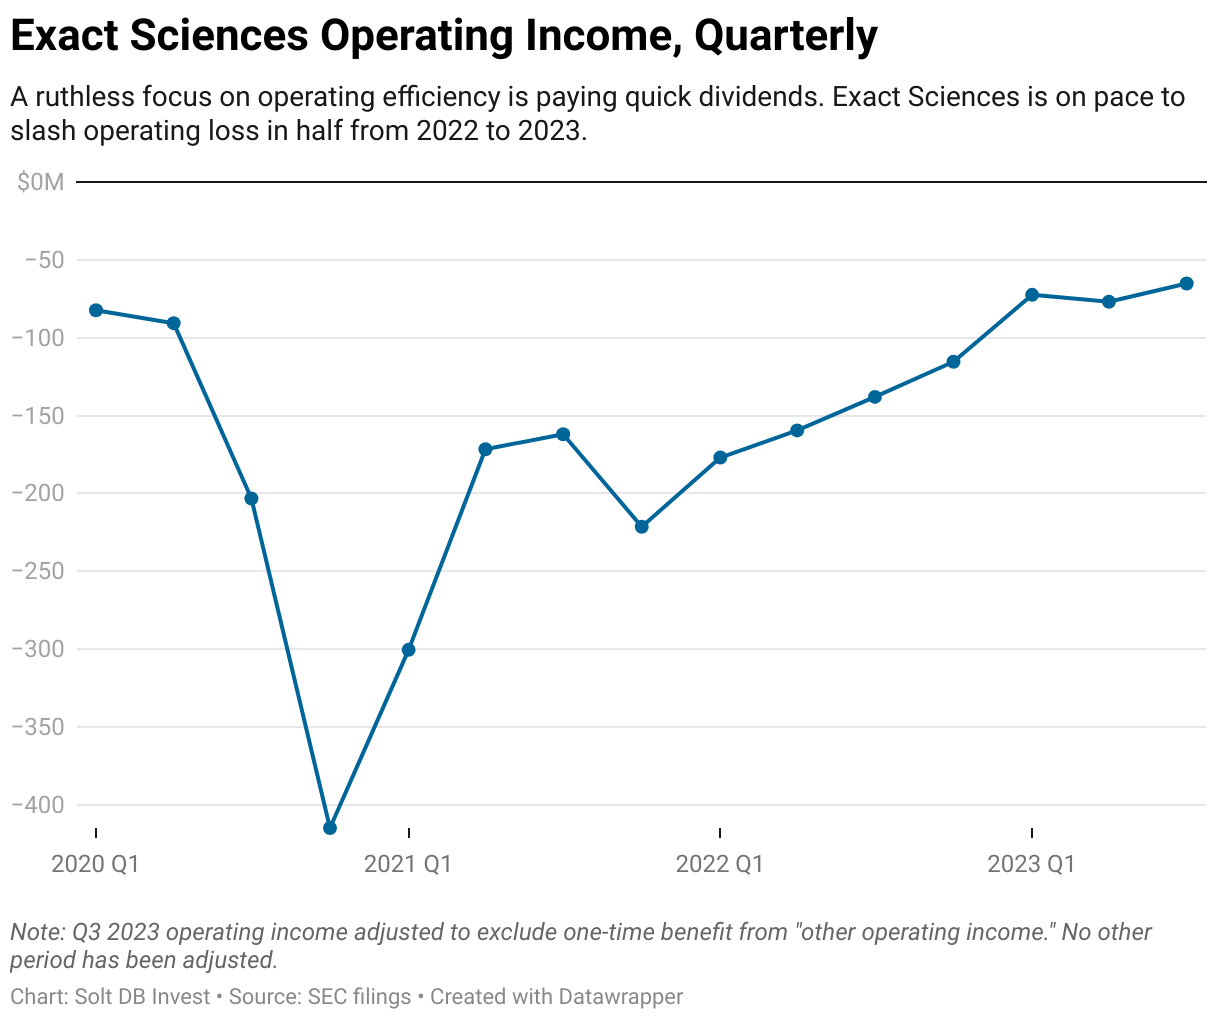 A graph showing sales and marketing expenses on a quarterly basis for Exact Sciences, beginning in Q1 2020 and ending in Q3 2023.